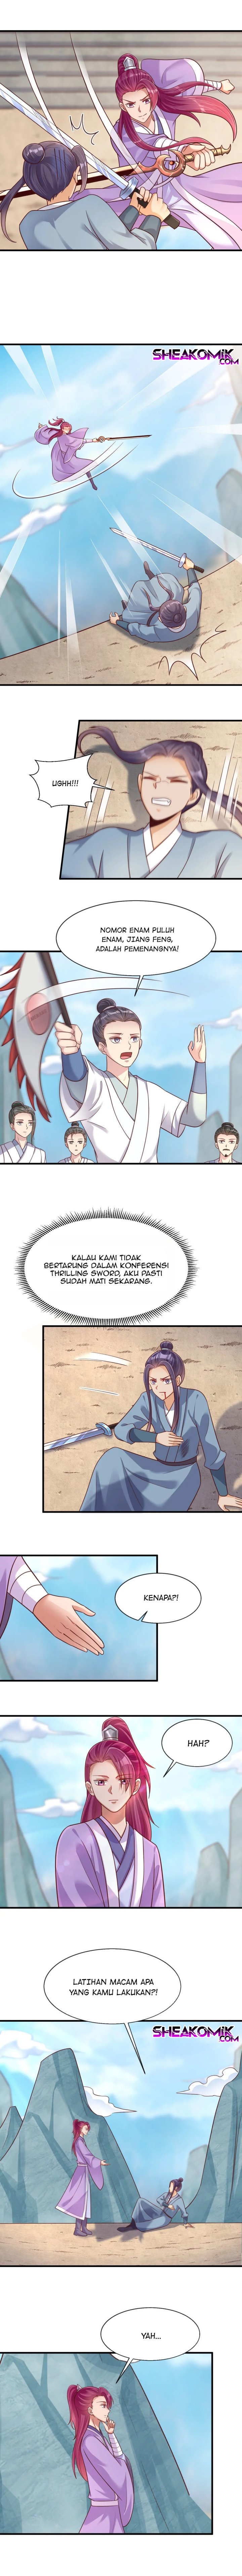 After The Friendship Full Chapter 90 Image 5